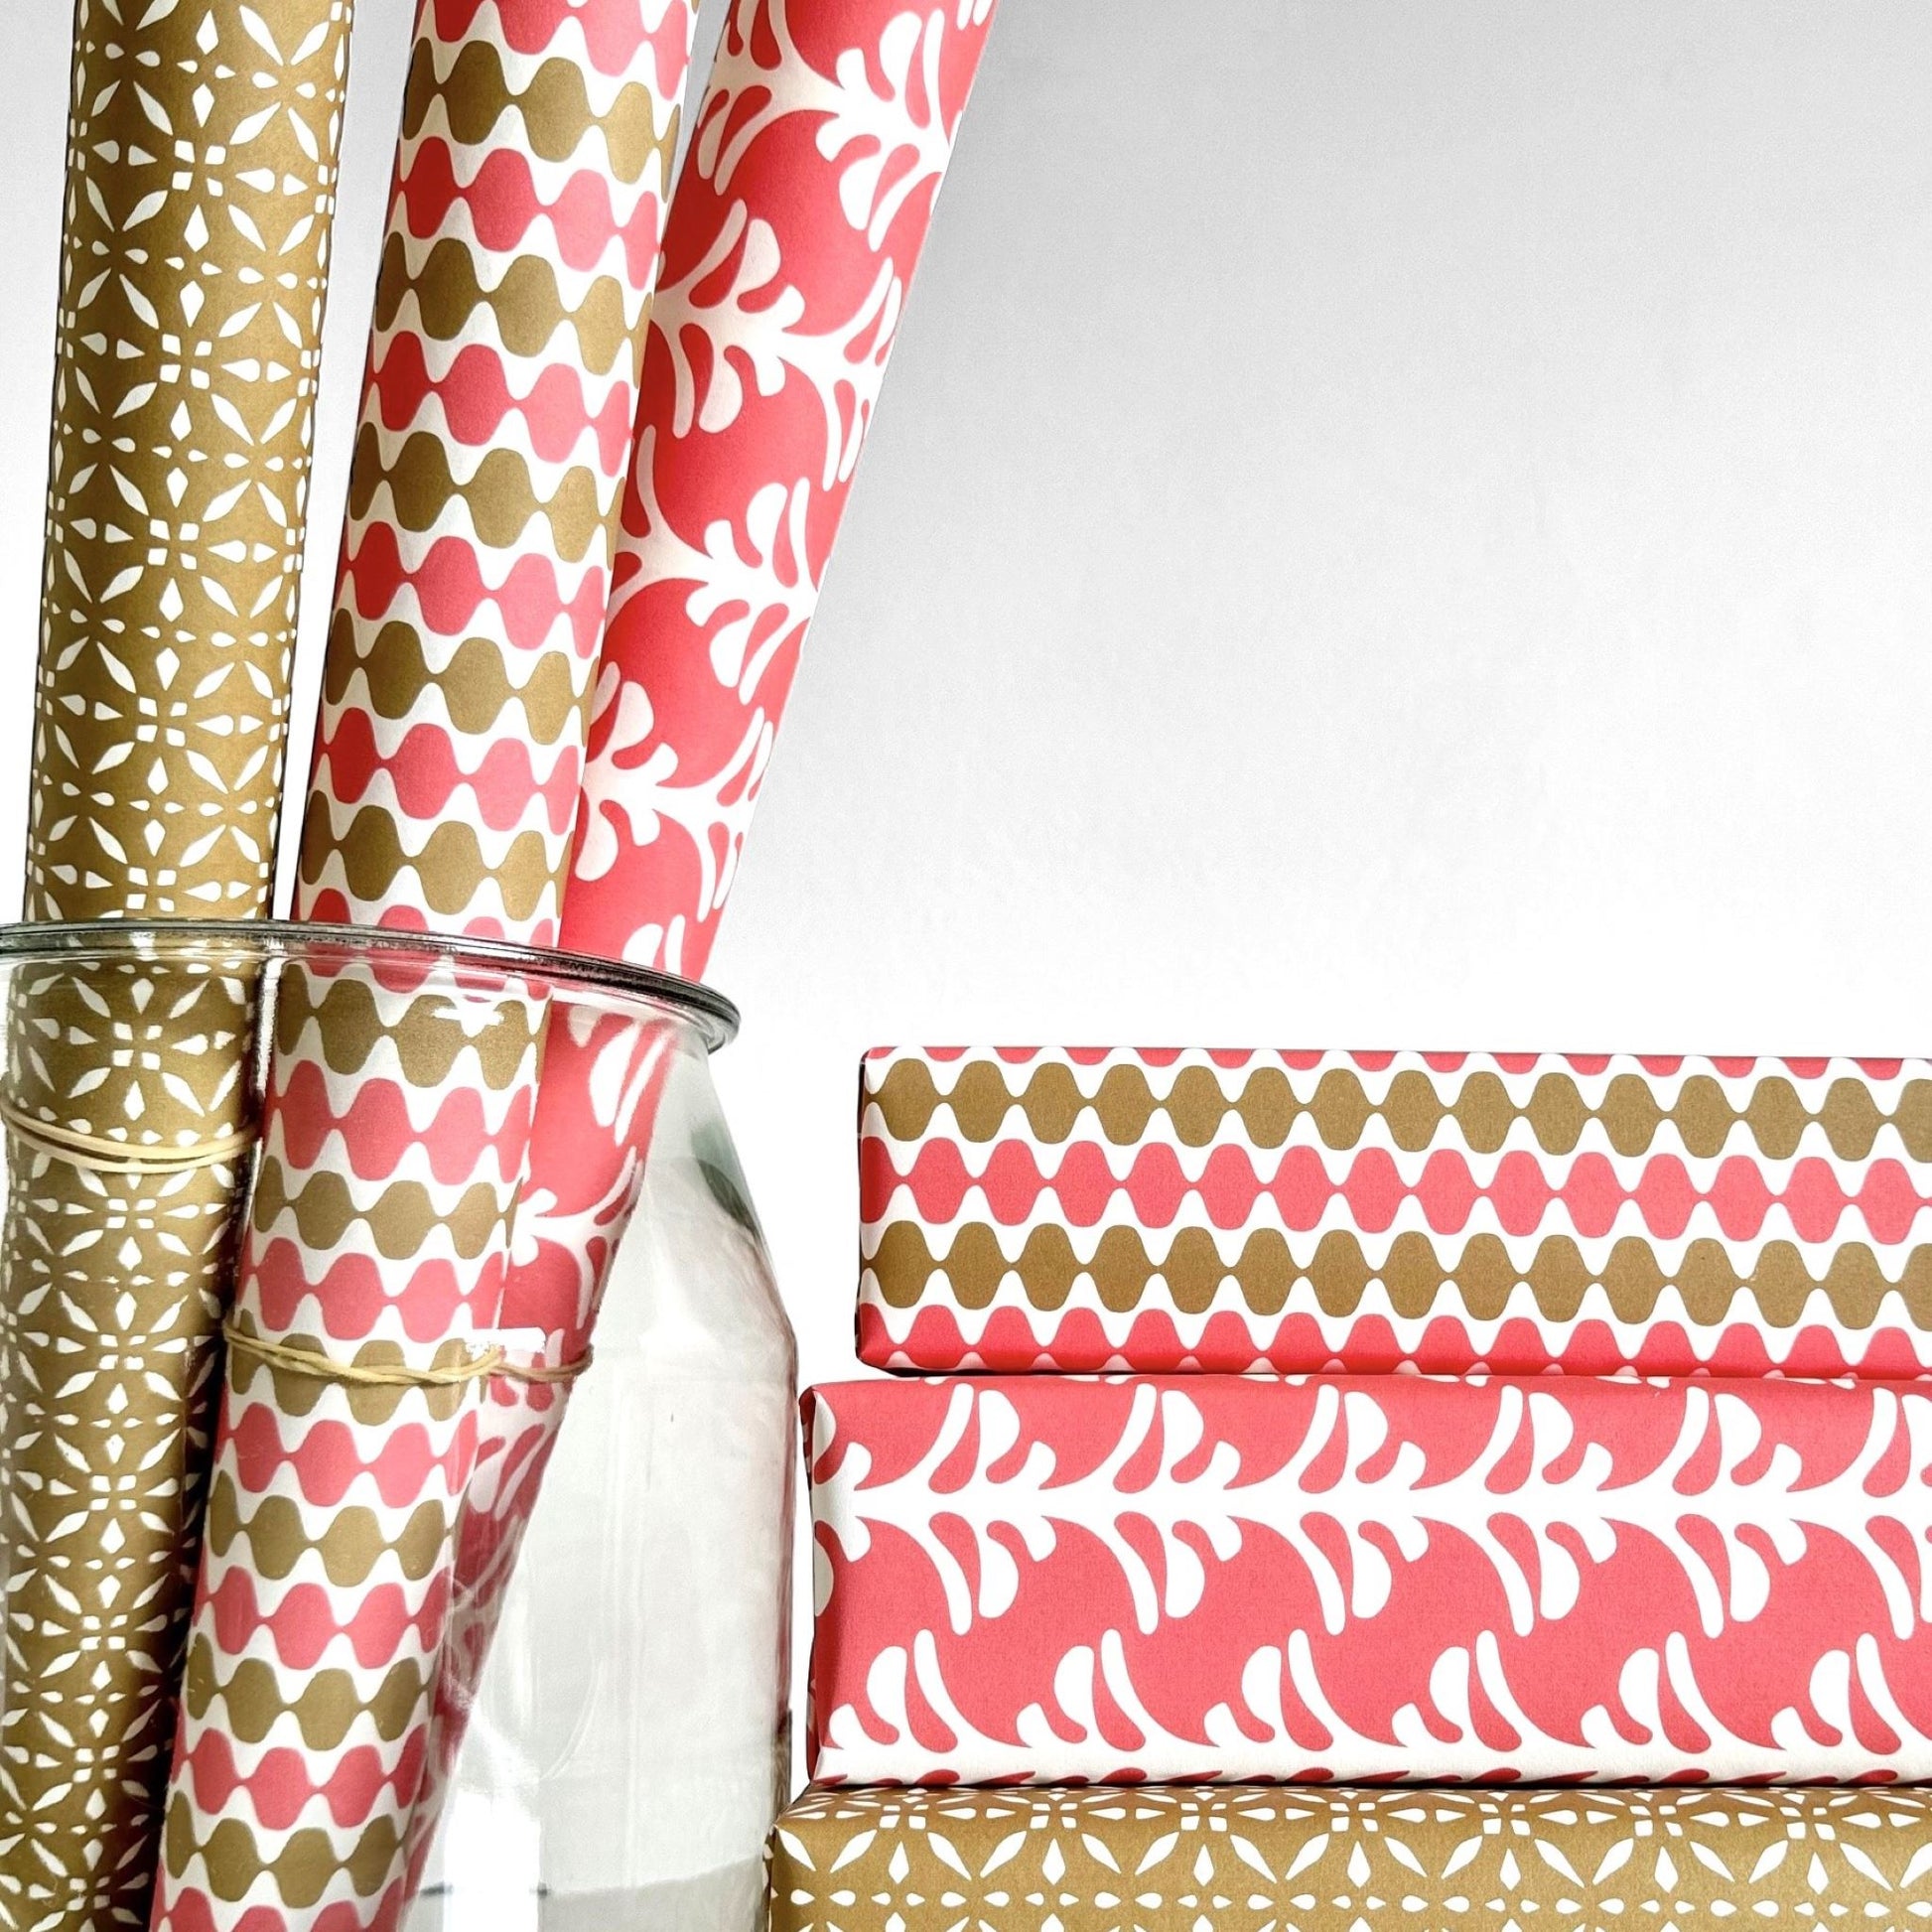 wrapping paper by Otto Editions with a cut-out palm design in white on a coral pink background. Pictured wrapped as a present alongside other designs